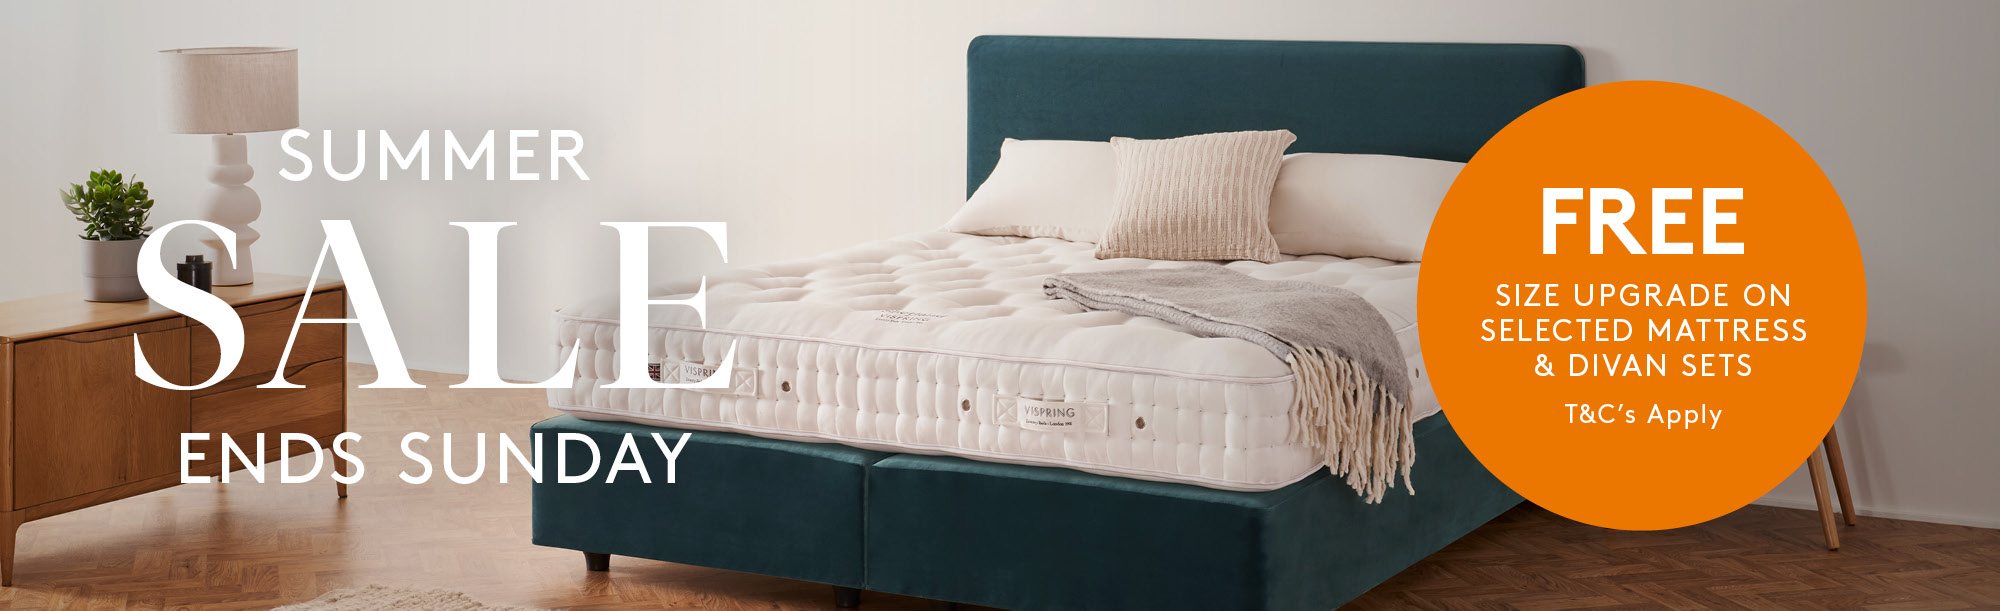 And So To Bed Summer Sale Offer Free Size Upgrade On Selected Vispring Mattress and Divan Sets